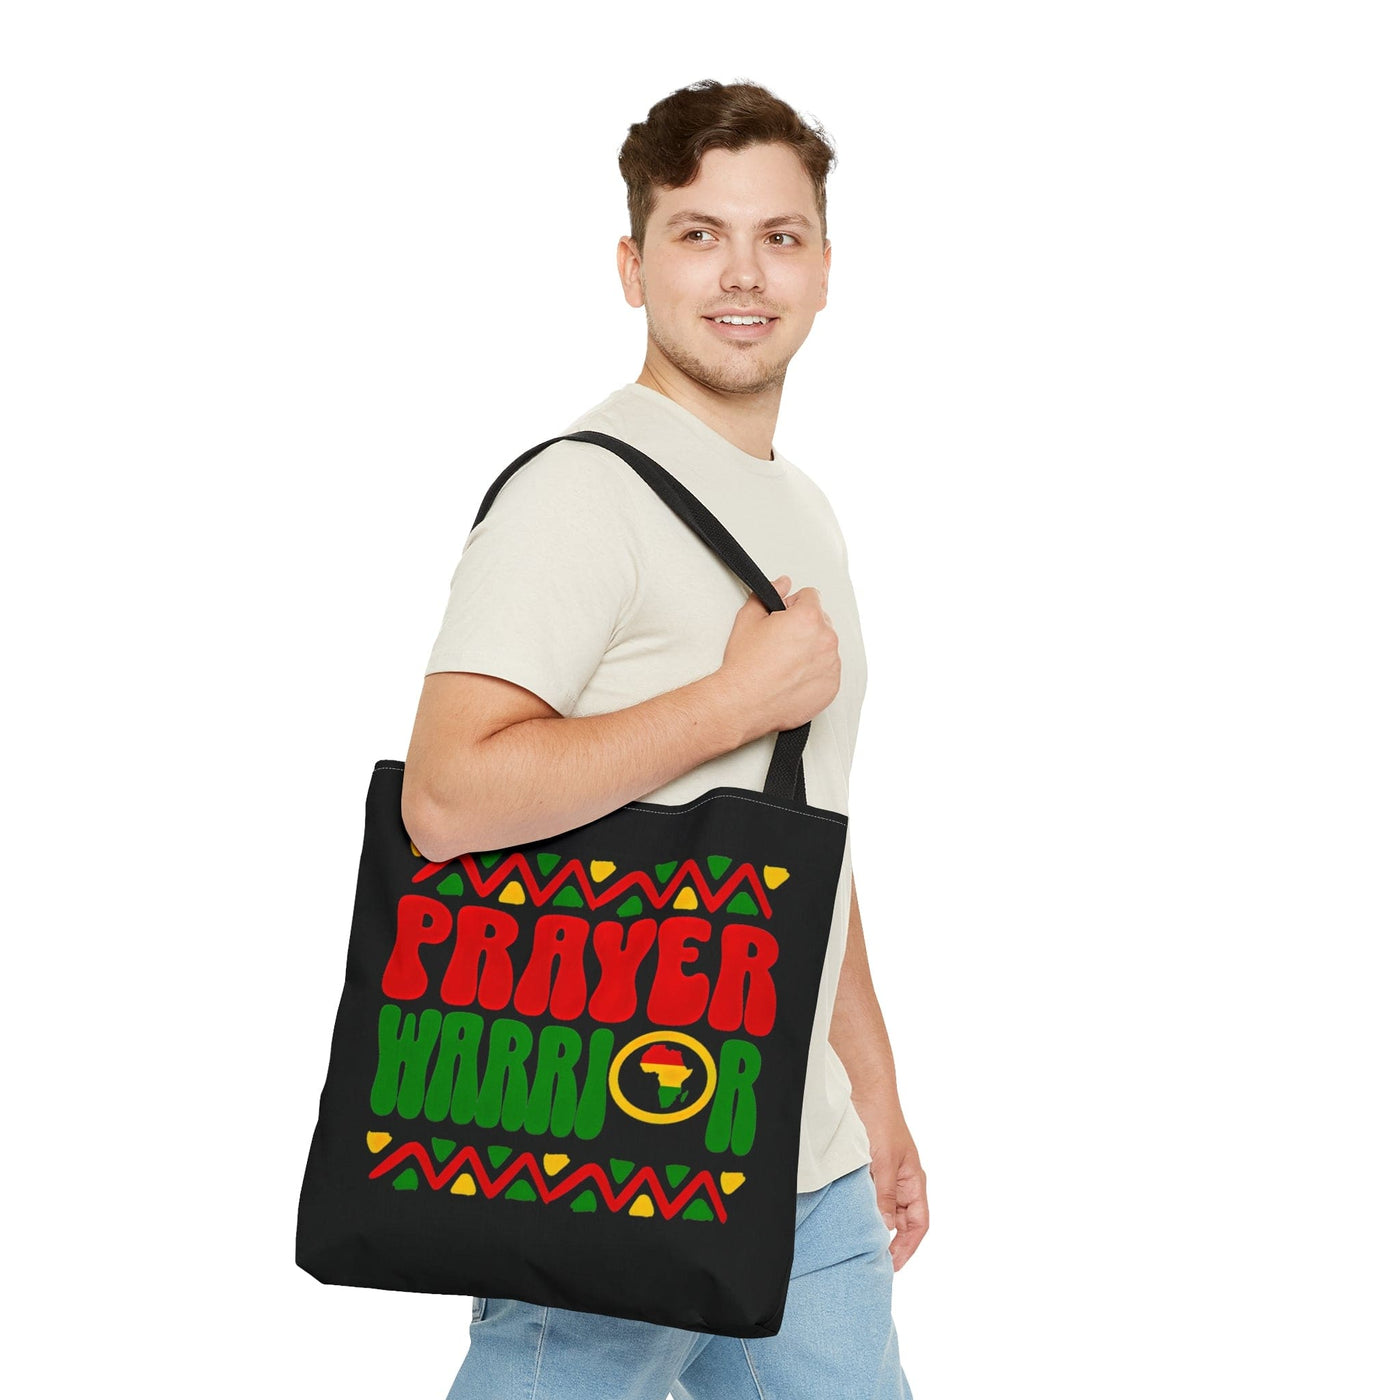 Canvas Tote Bag Prayer Warrior African Inspiration Illustration Red Green - Bags